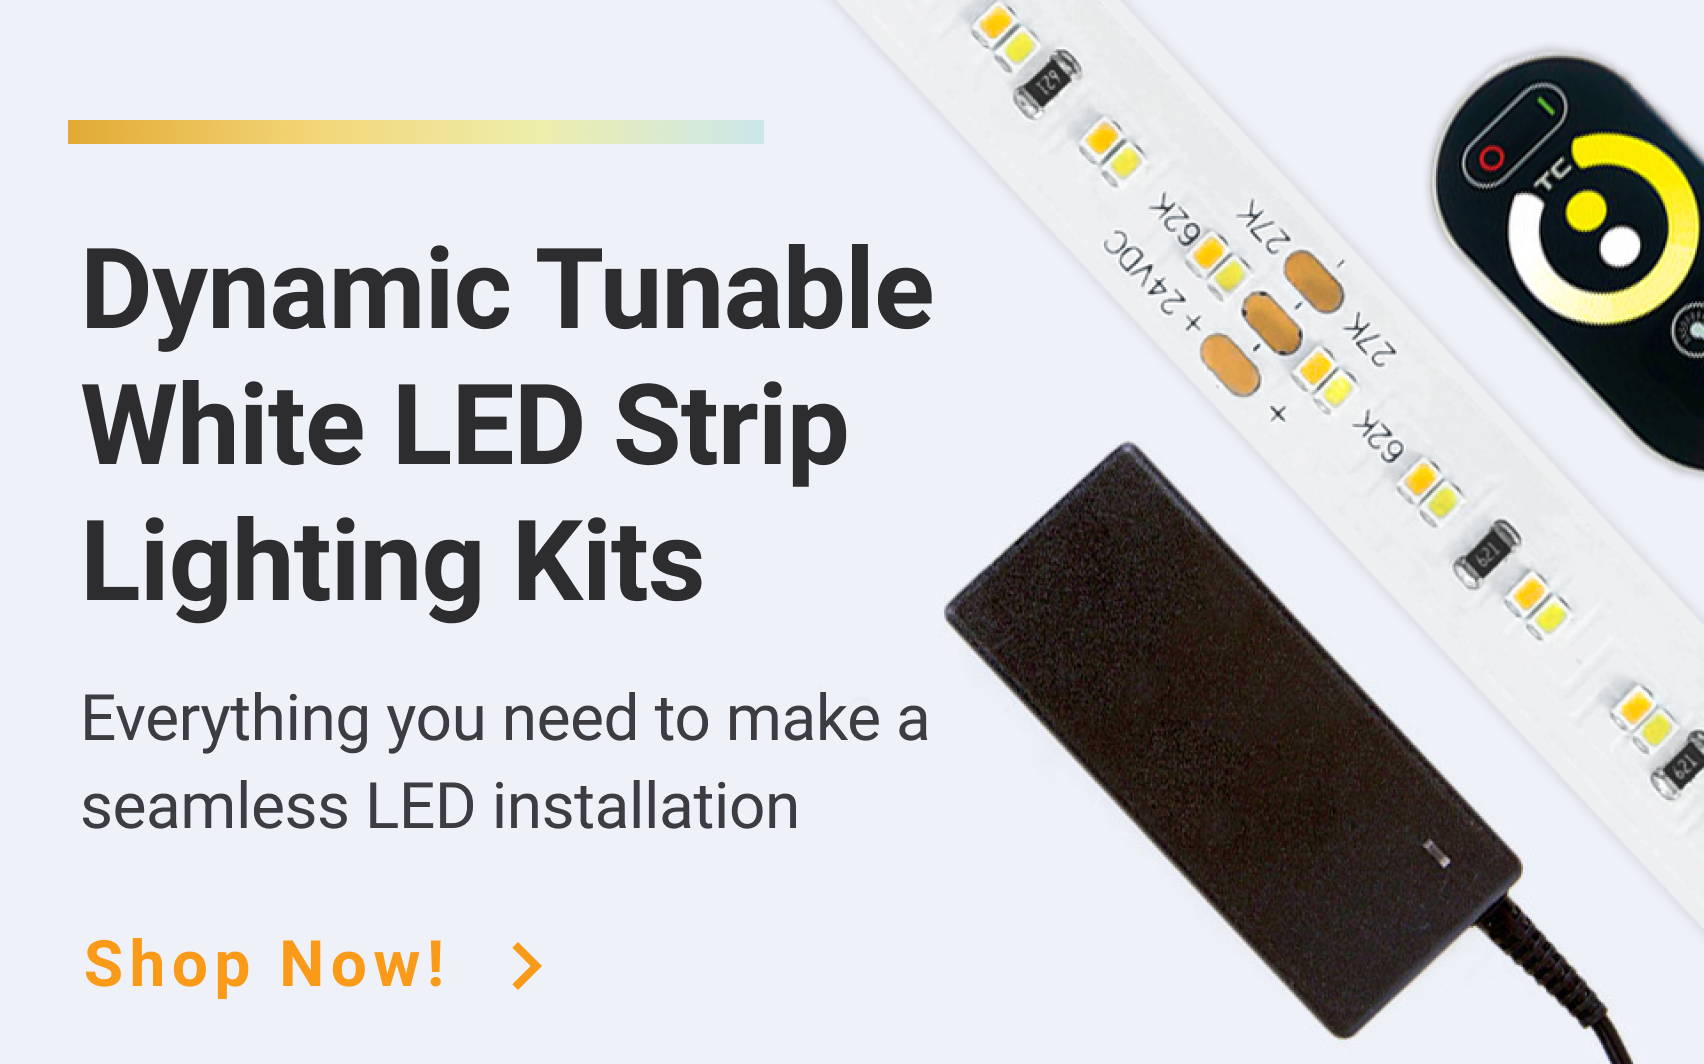 Dynamic Tunable White LED strip lighting kits - everything you need in one kit